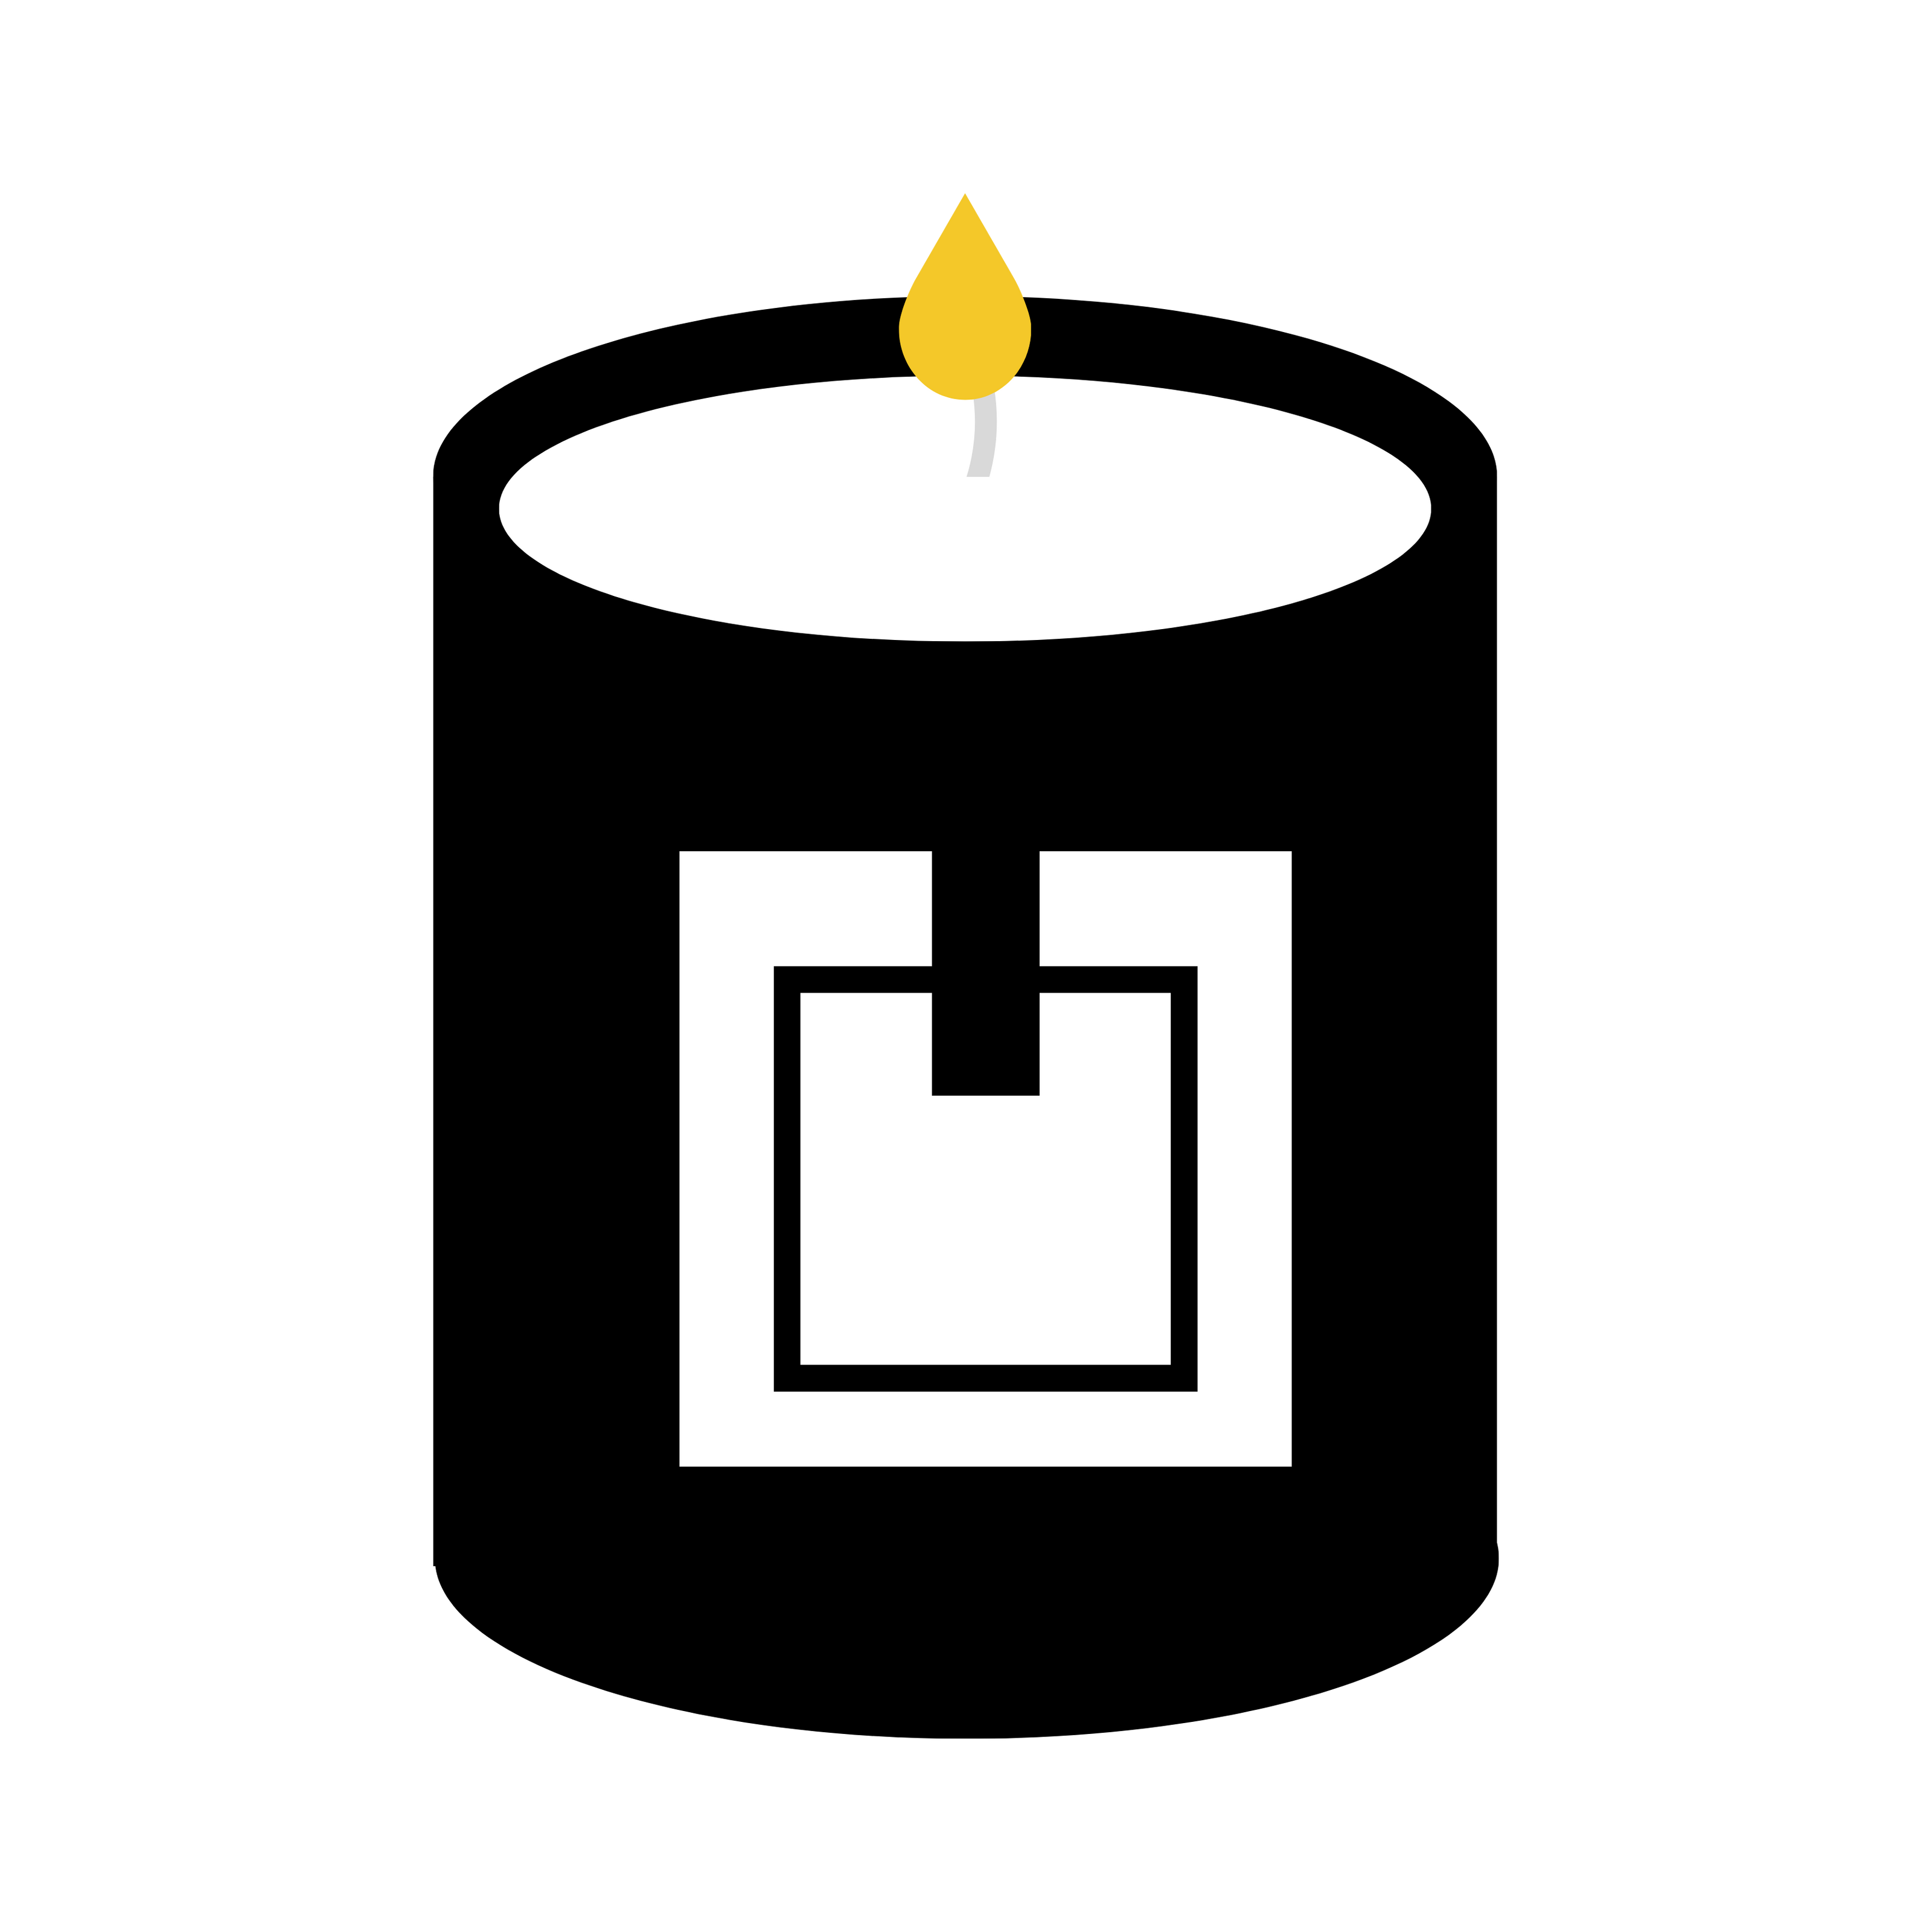 Citea candle design drawing in black 